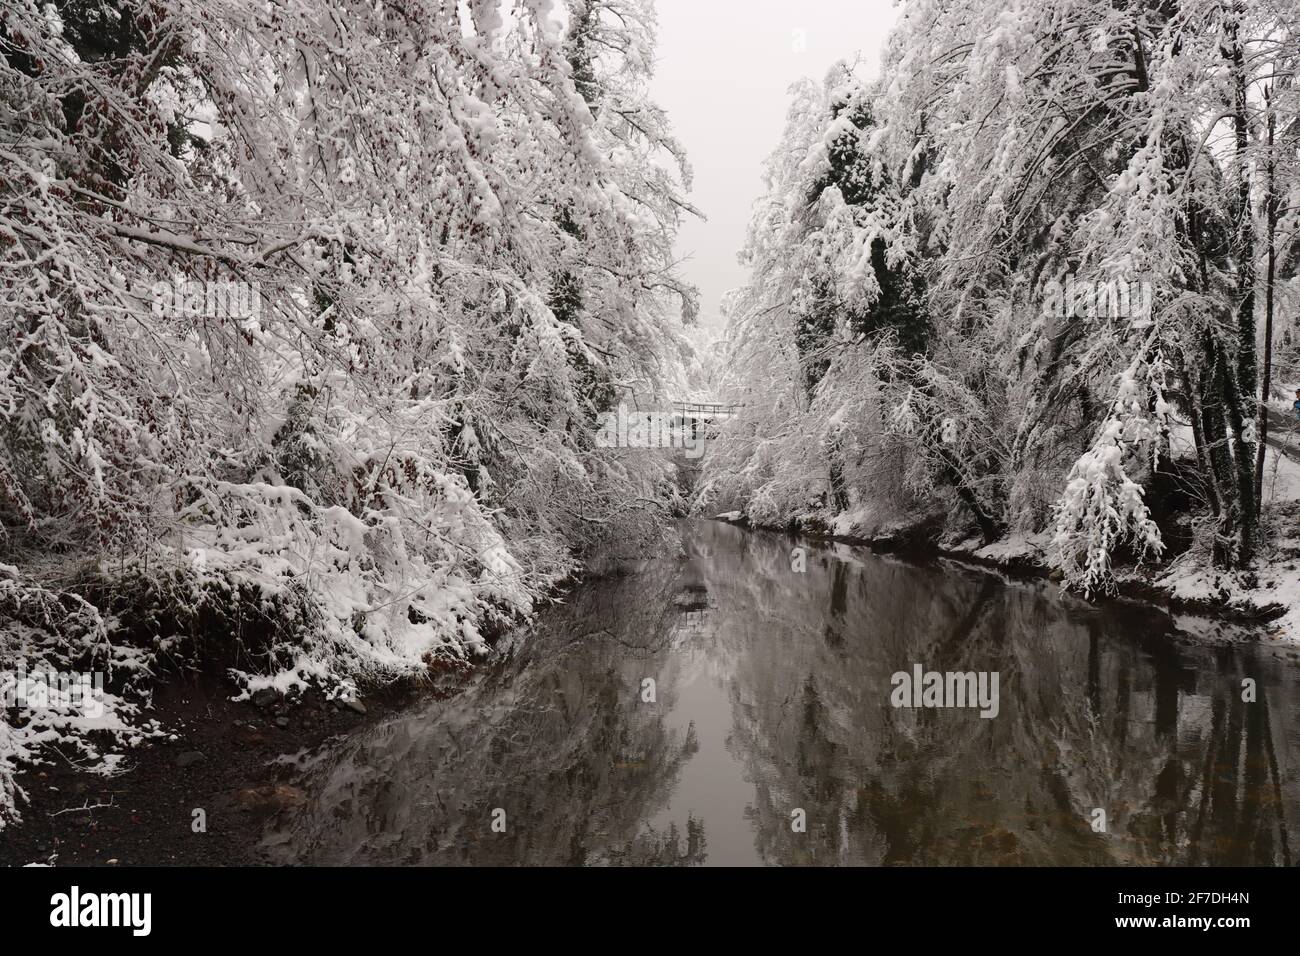 Snow covered trees along river in winter landscape Stock Photo